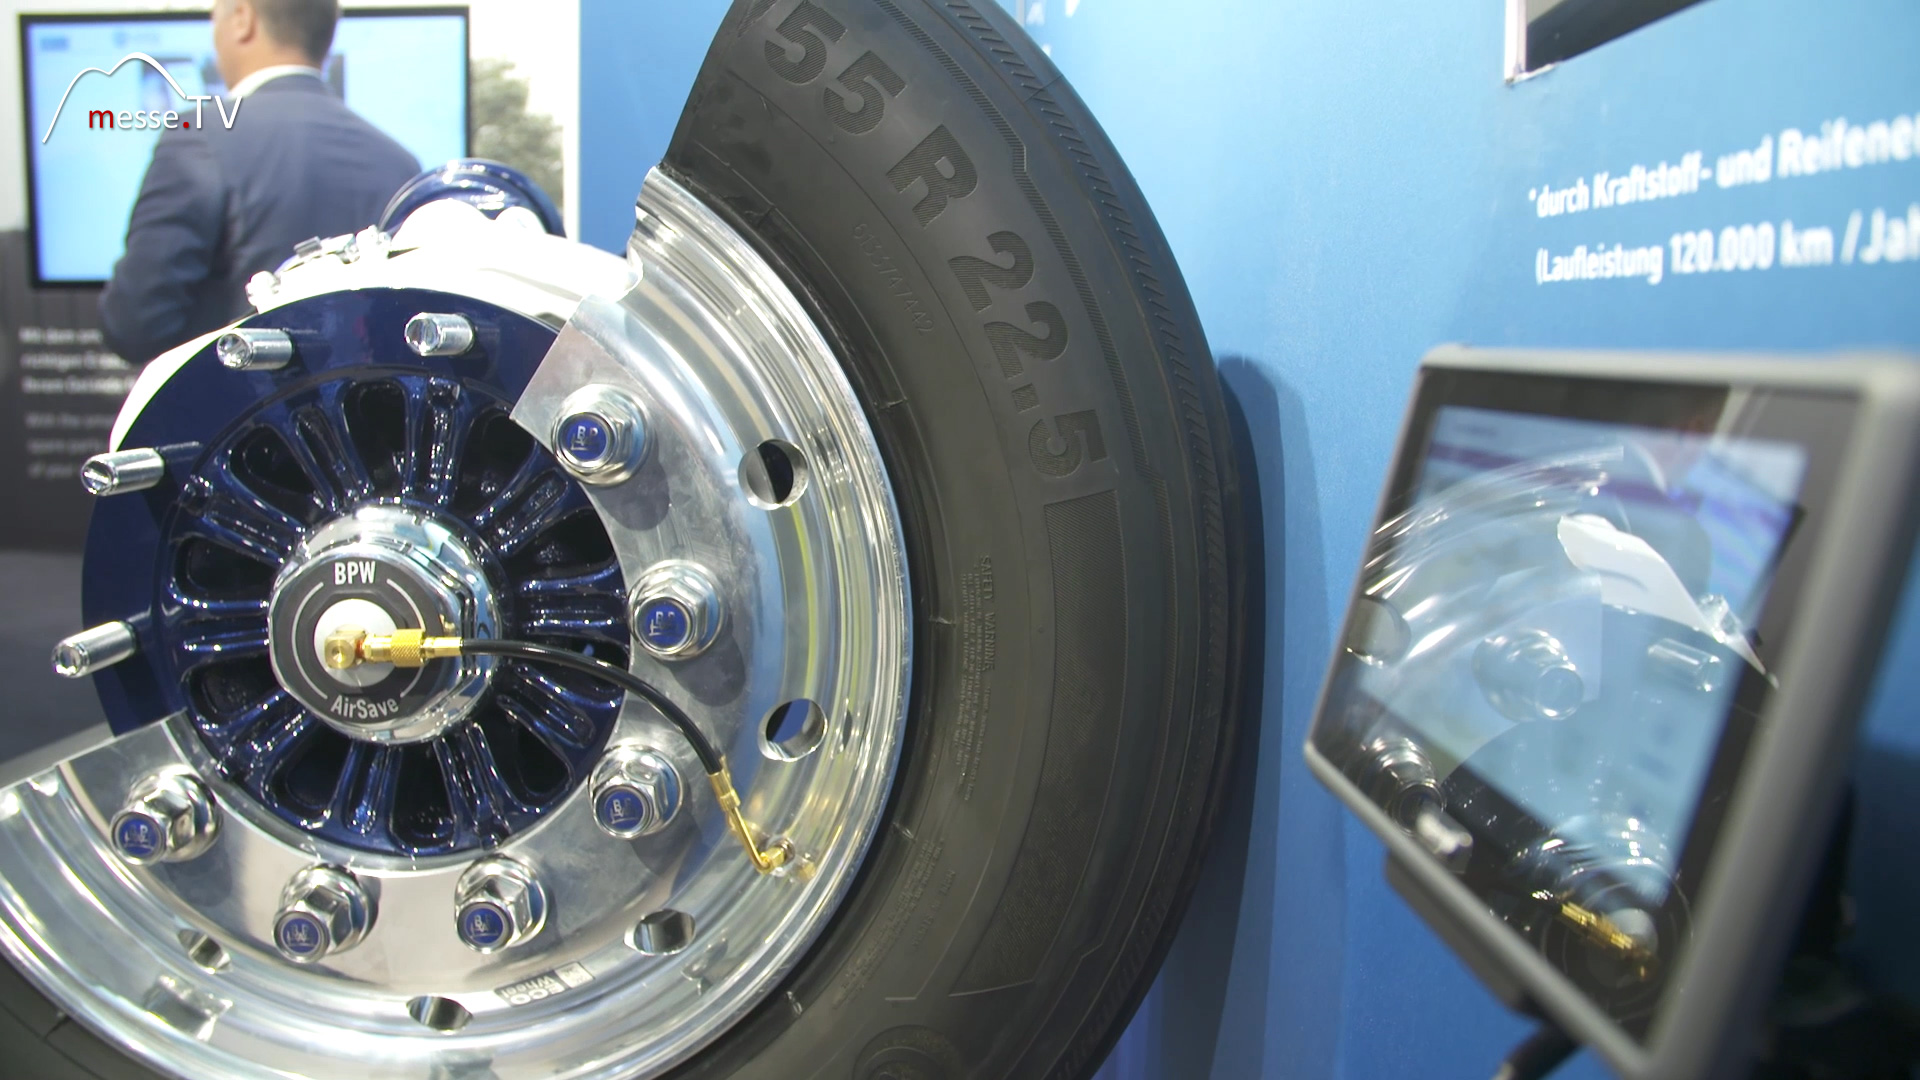 BPW AirSafe with correct truck tyre pressure cost savings